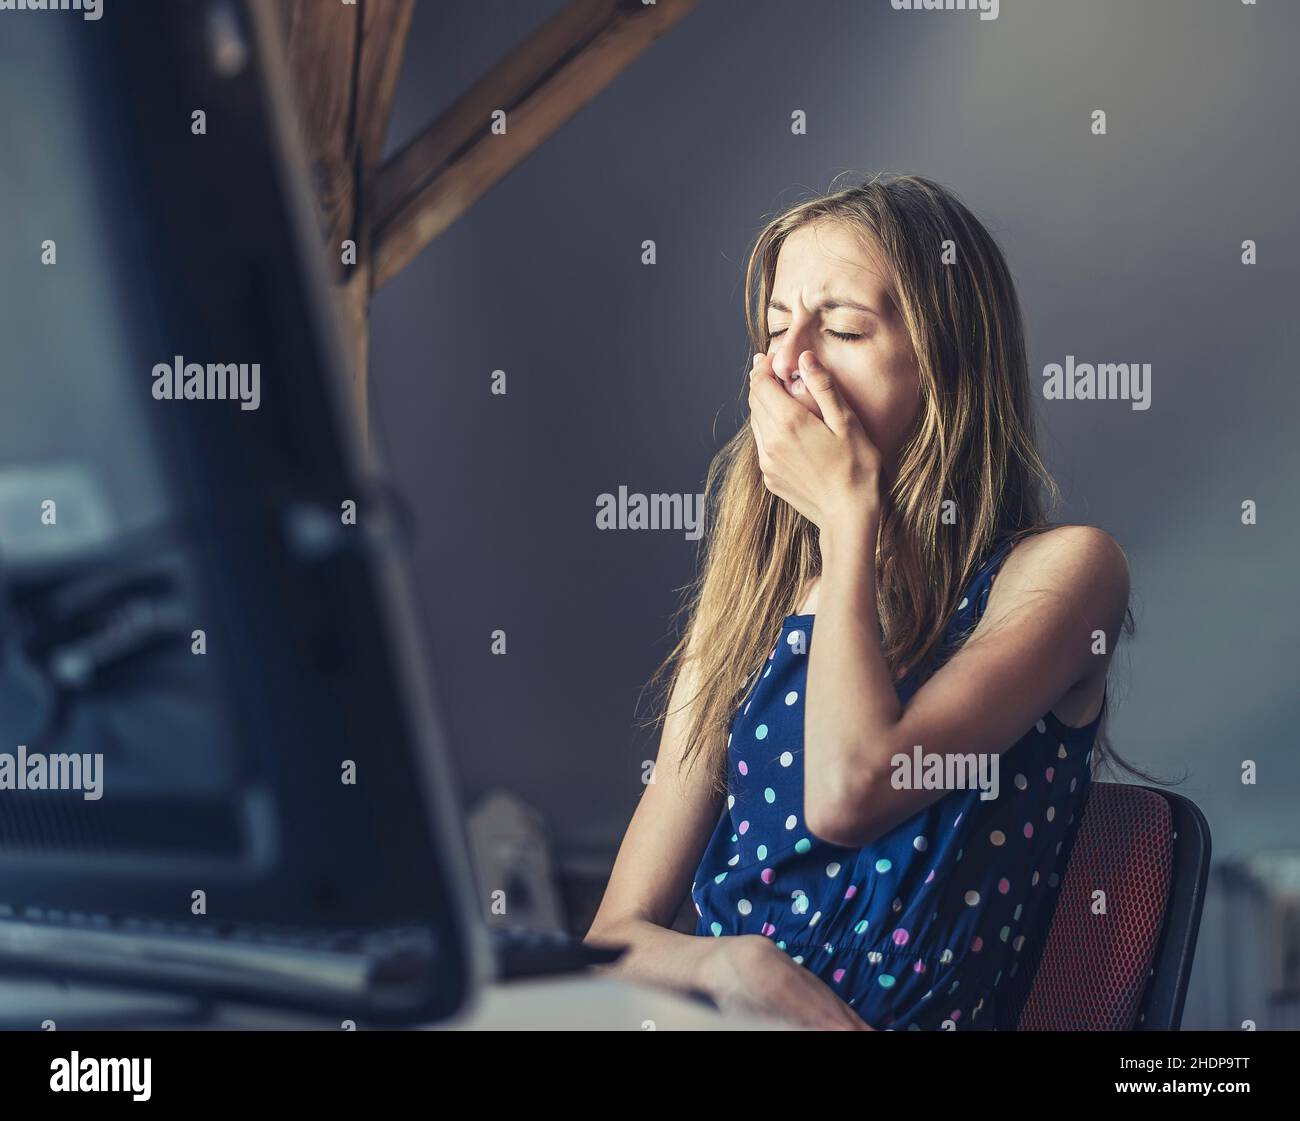 girl, tired, exhausted, social media, girls, tireds, exhausteds Stock Photo